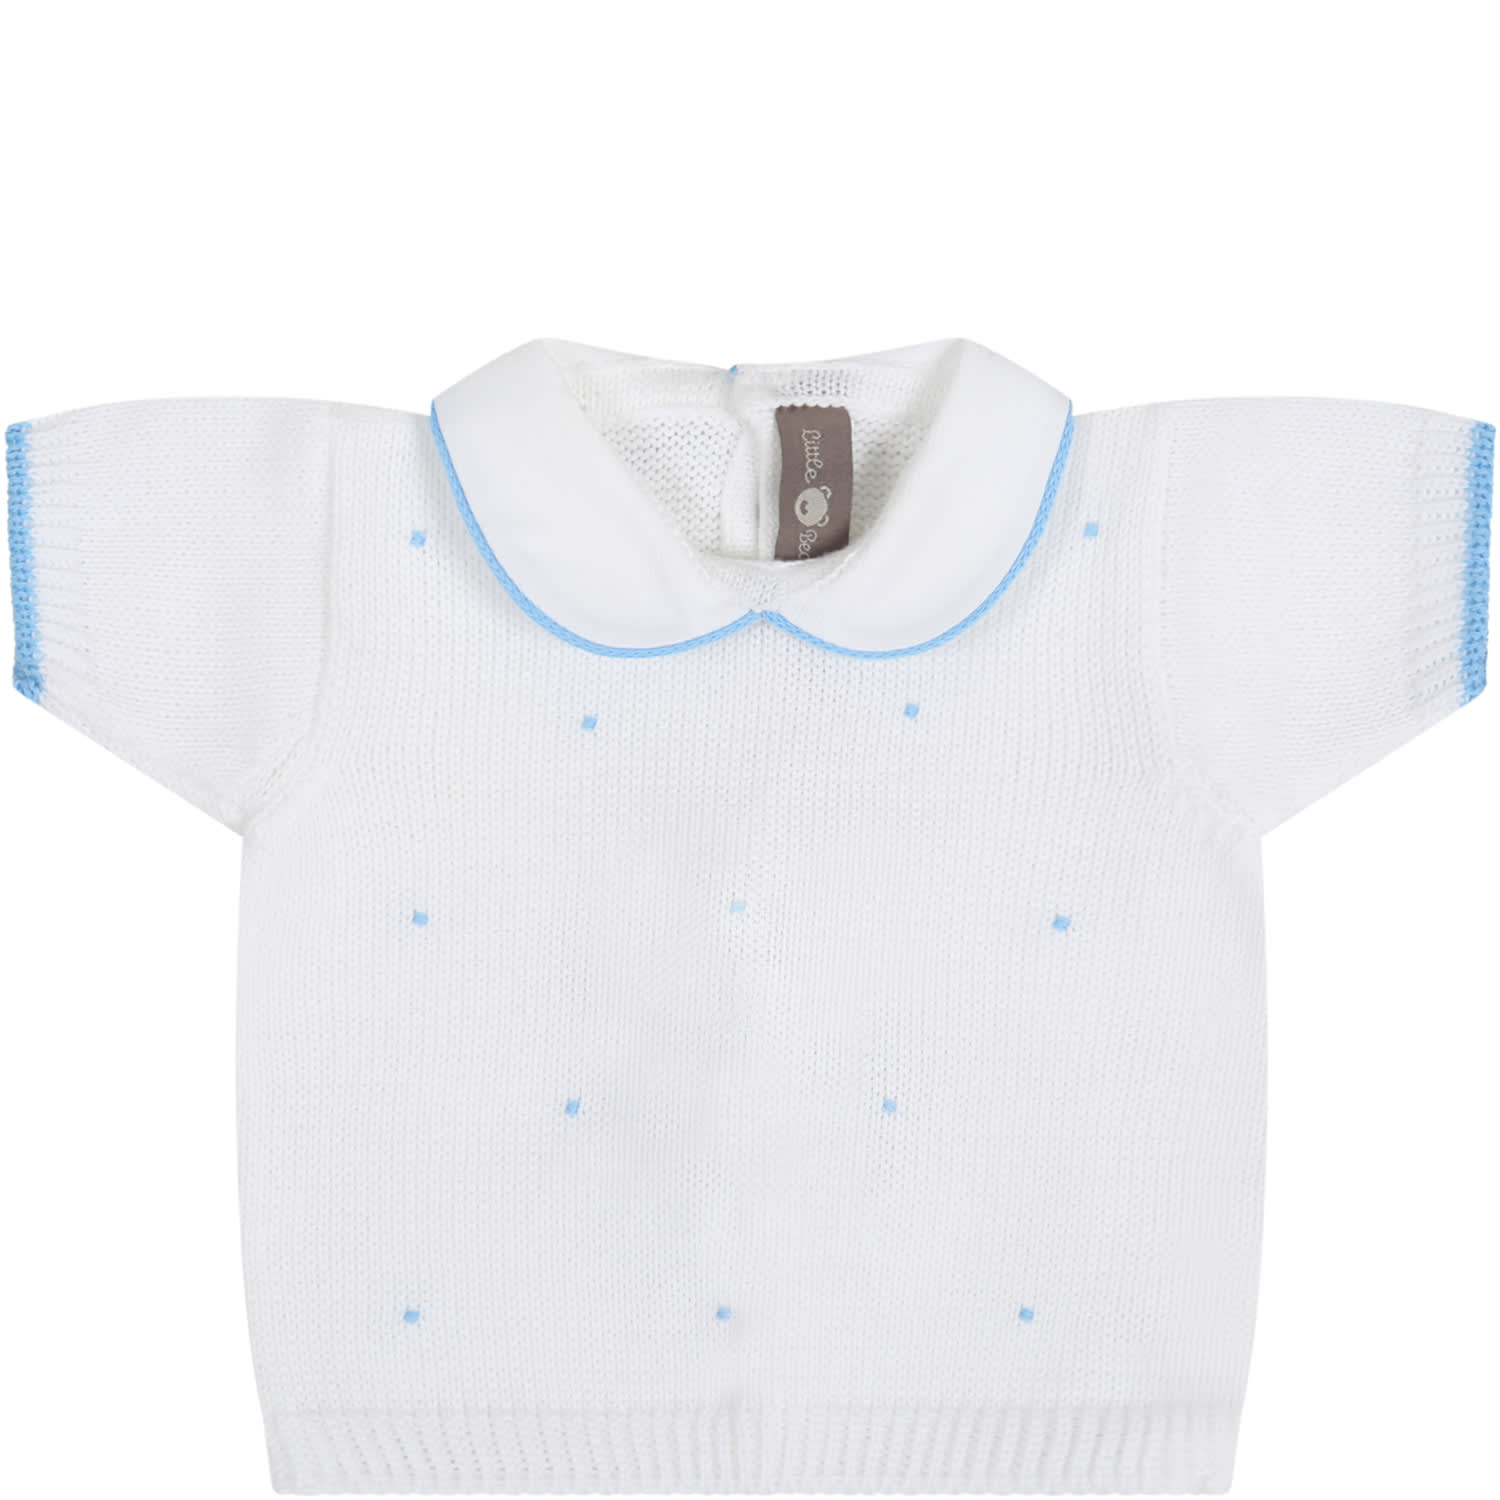 Little Bear White T-shirt For Babyboy With Polka-dots